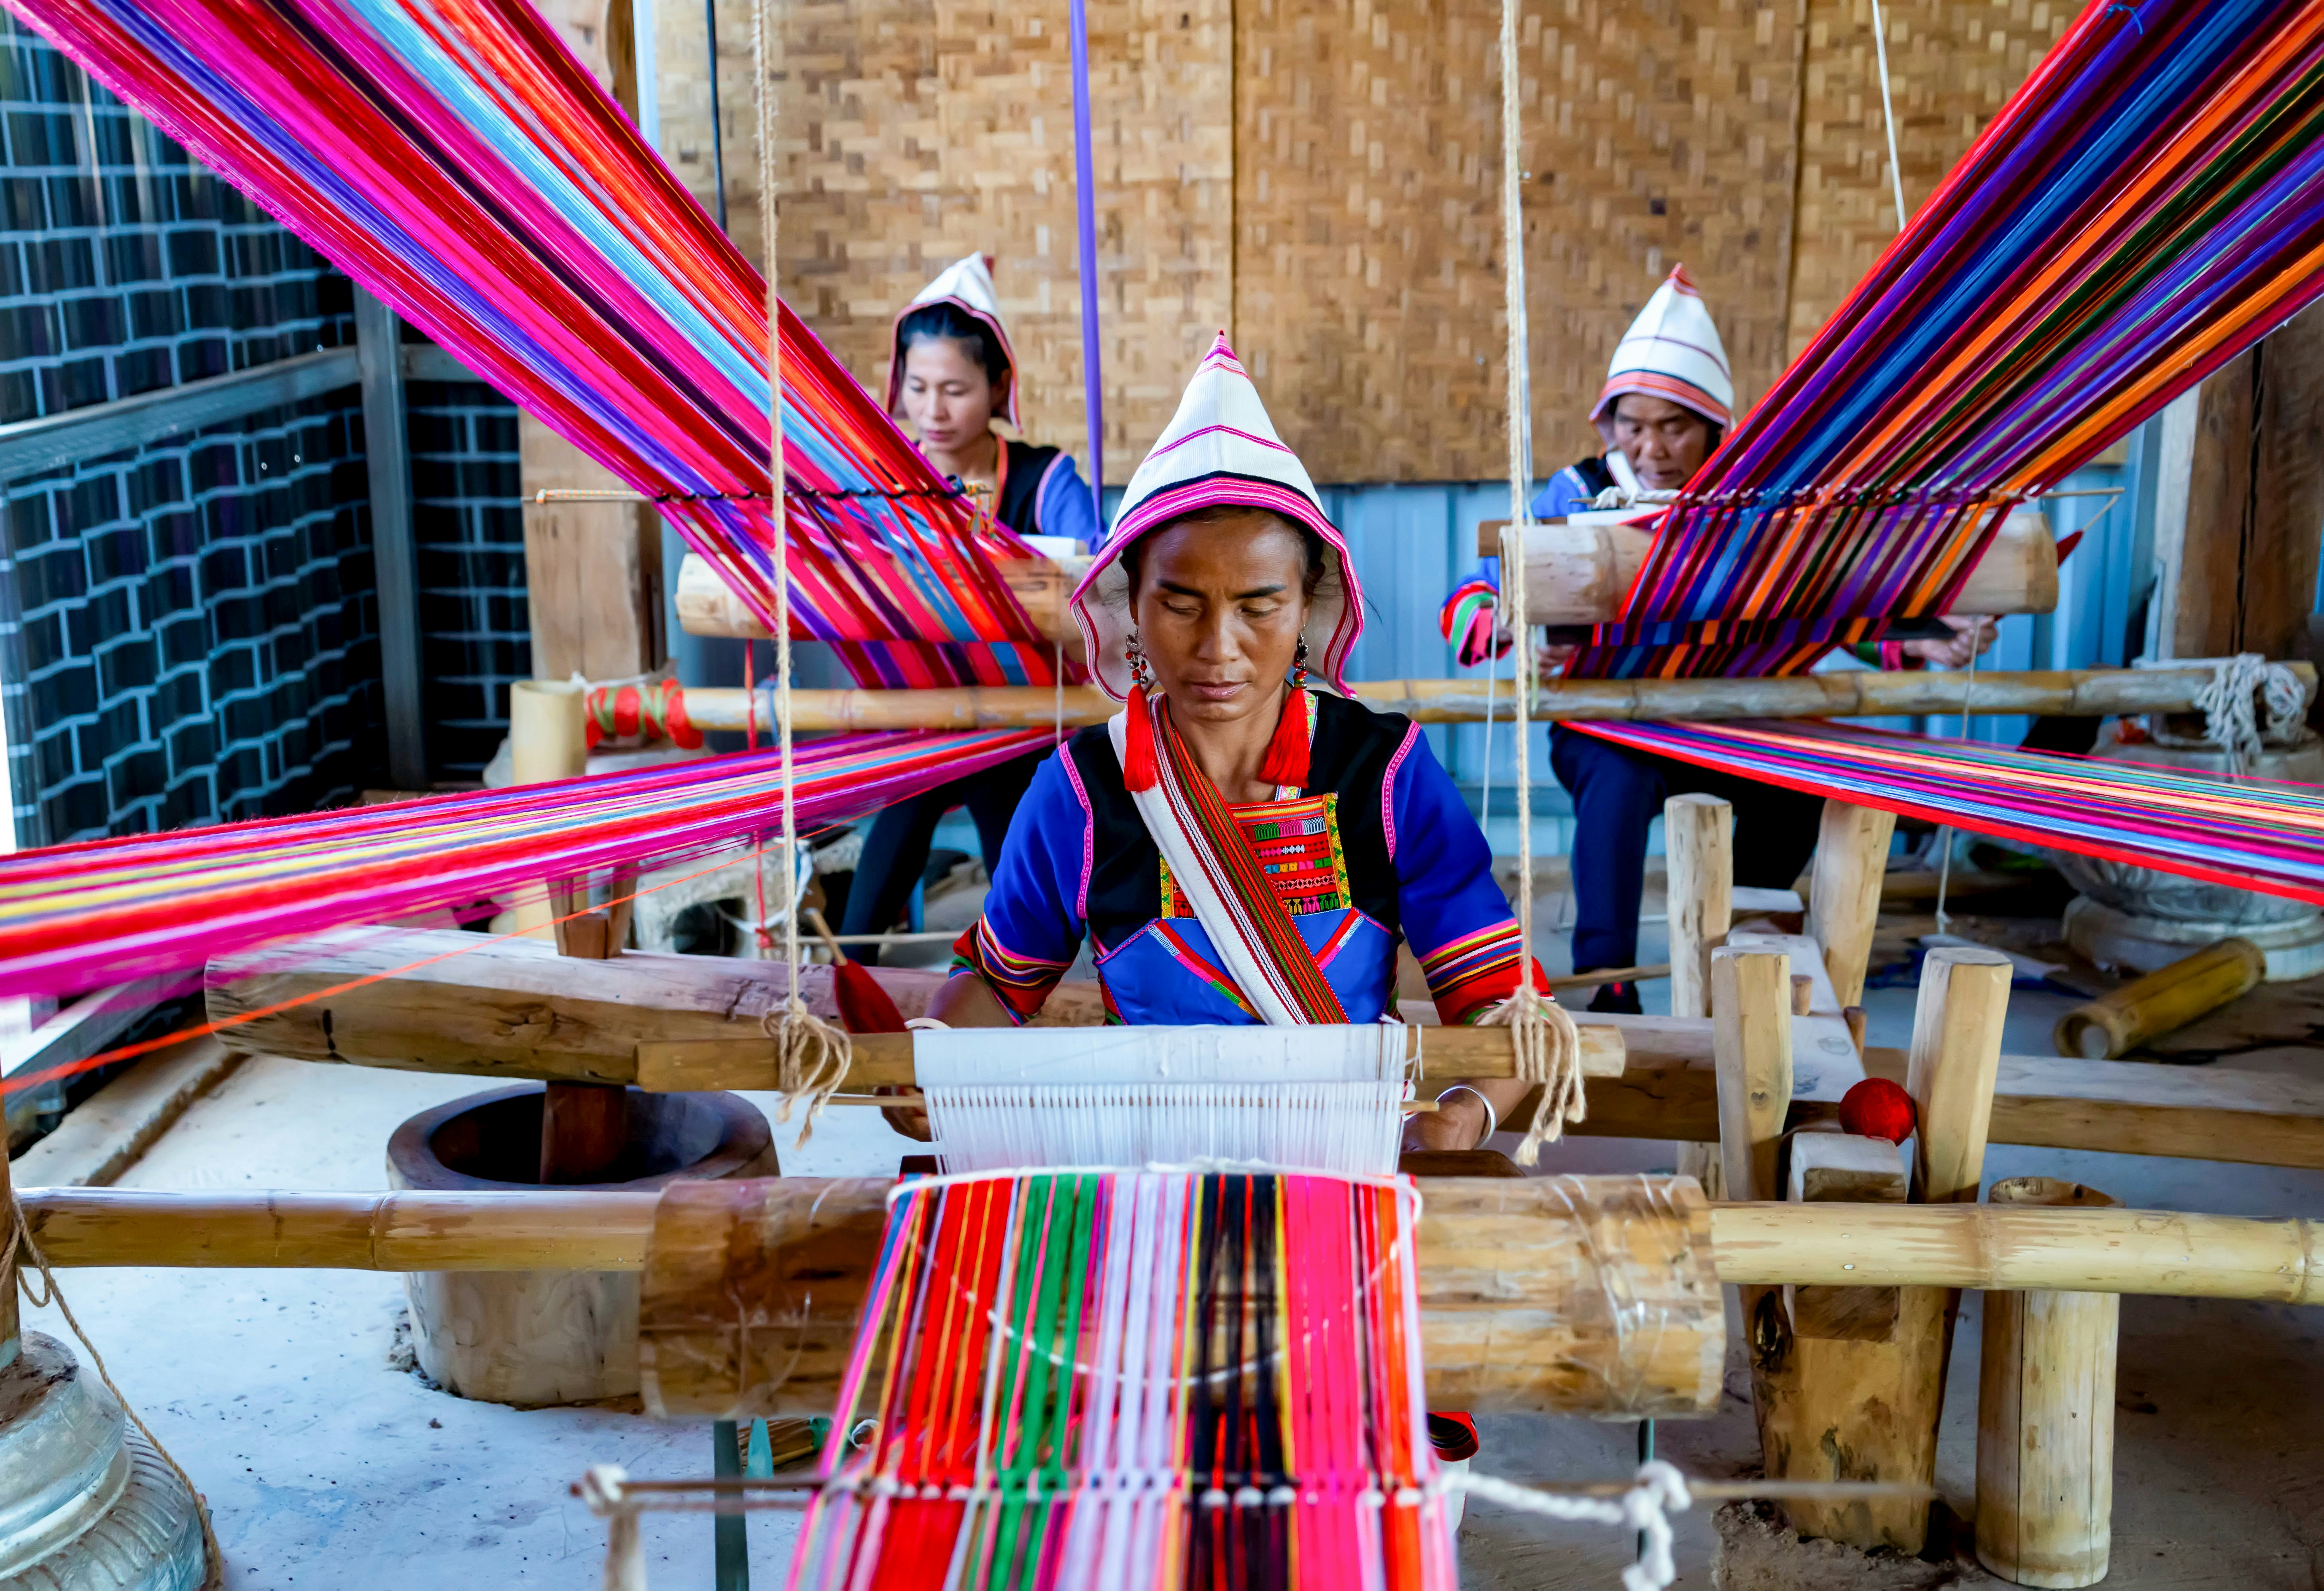 He Guiying C weaves cloths with two members of the handicraft cooperative in Xinsitu Village of Jinuo ethnic group in Jinghong City of Xishuangbanna Dai Autonomous Prefecture, southwest China's Yunnan Province